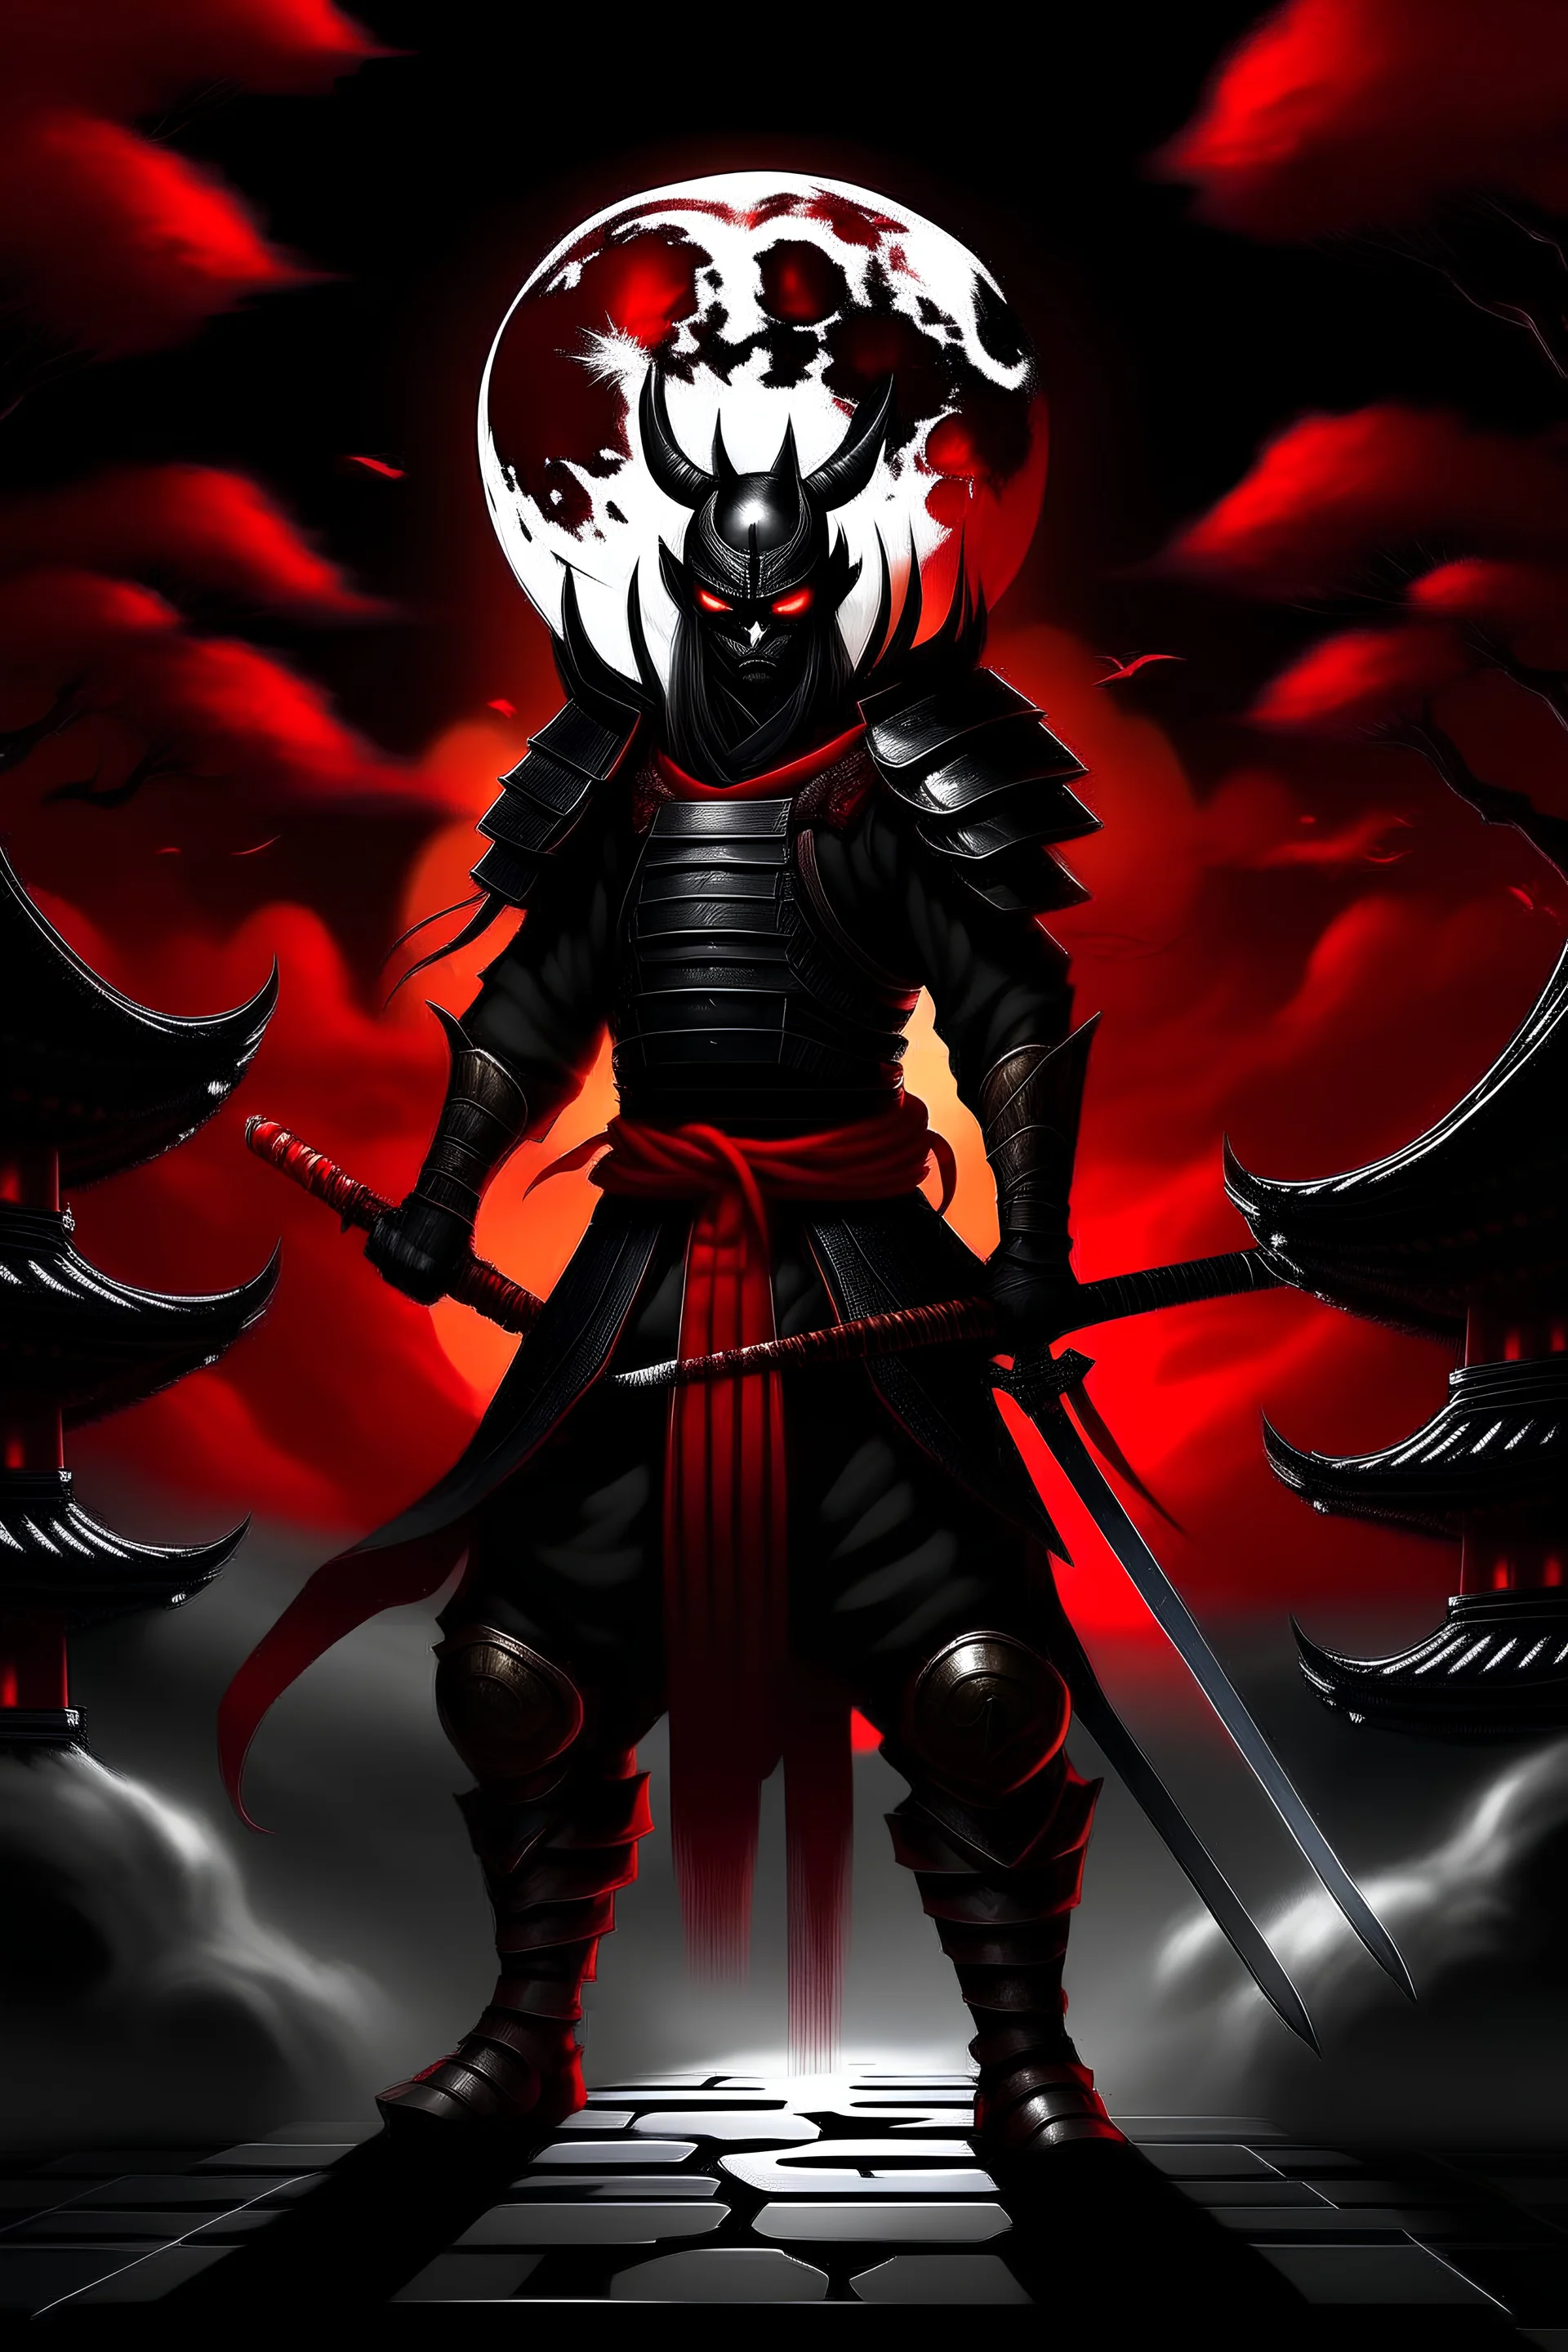 A samurai in black Armour and red eyes with a black flaming sword and red hilt, standing on a temple with the moon in the background and the trees on the side